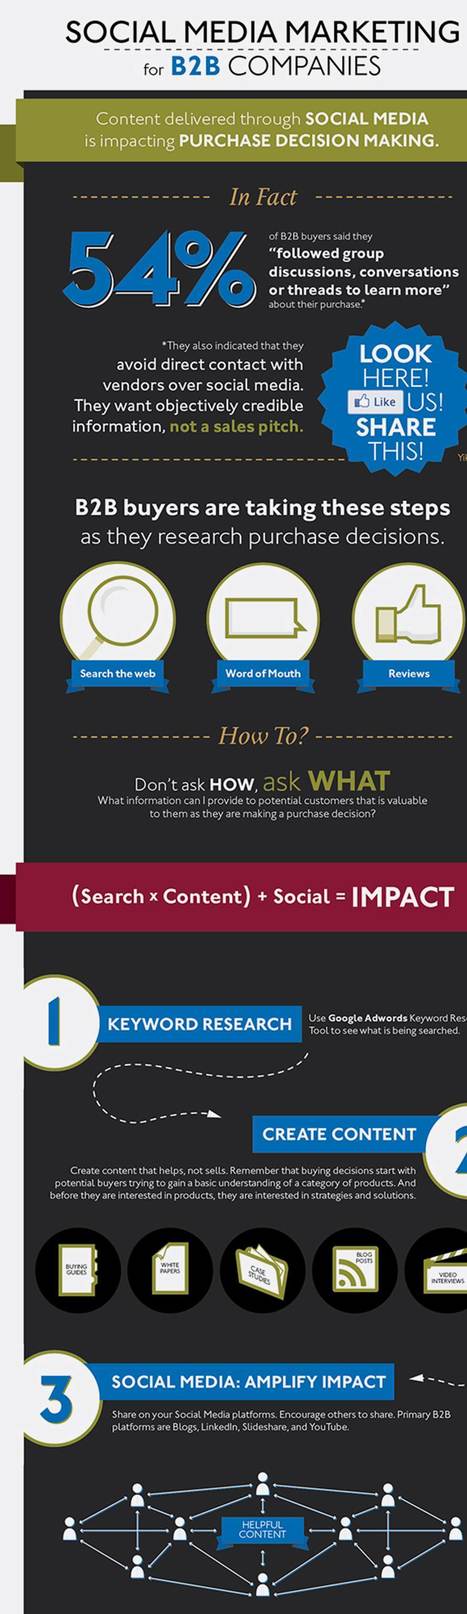 JPL - Social Media Marketing for B2B Companies [INFOGRAPHIC] | The MarTech Digest | Scoop.it